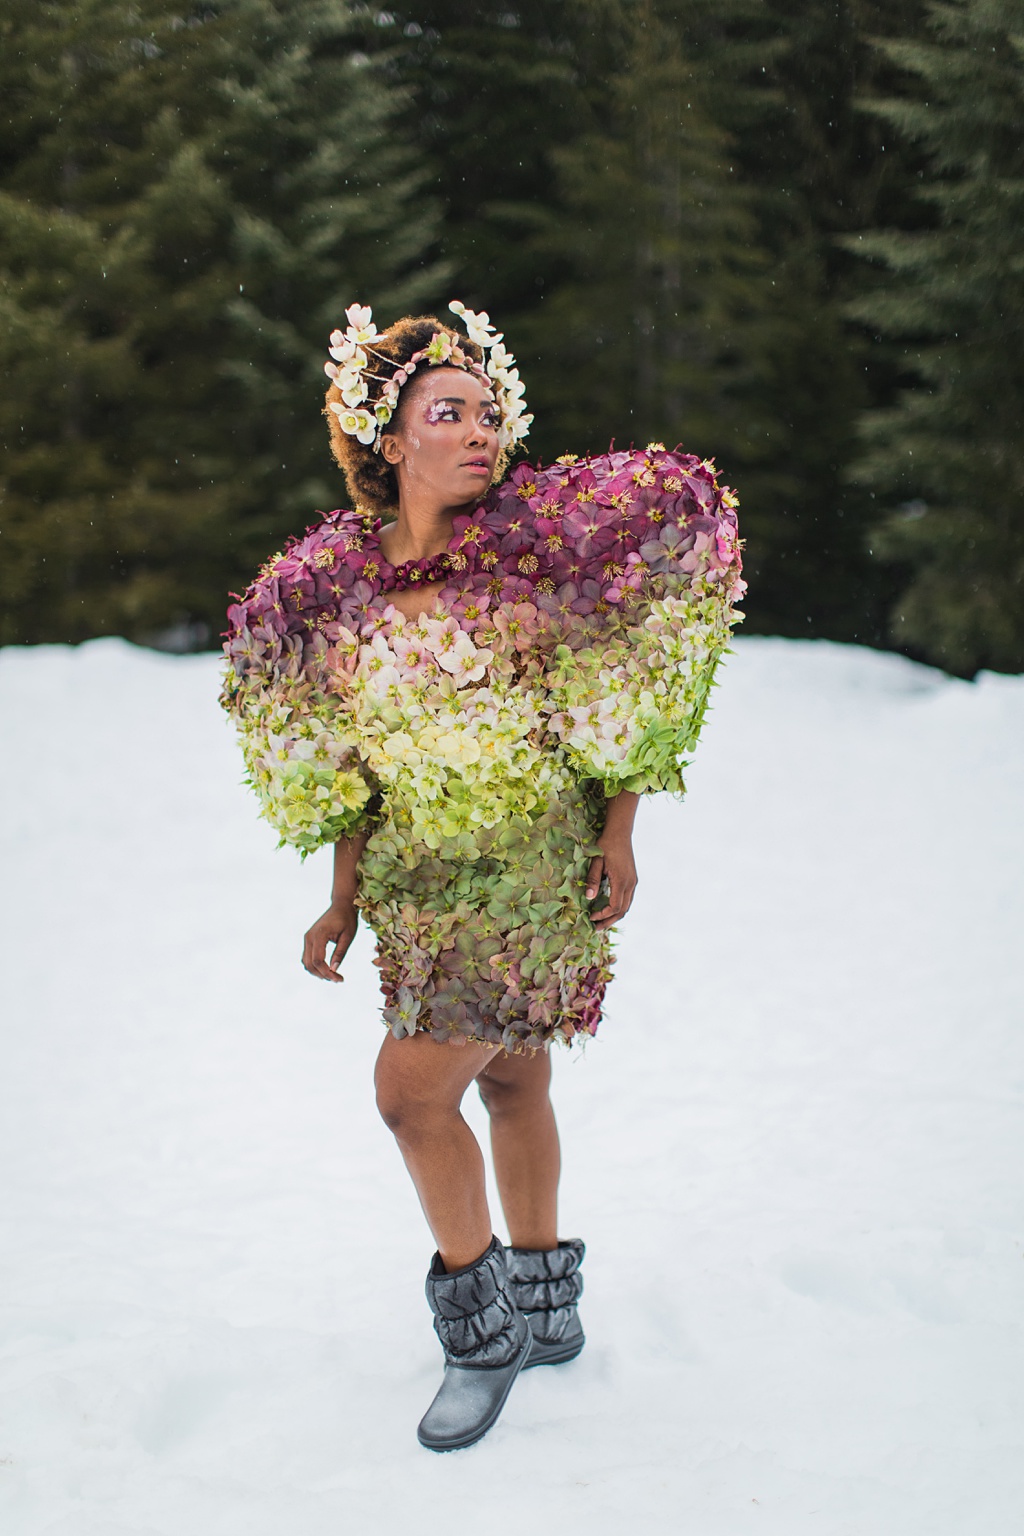 Our full couture flower dress in the snow